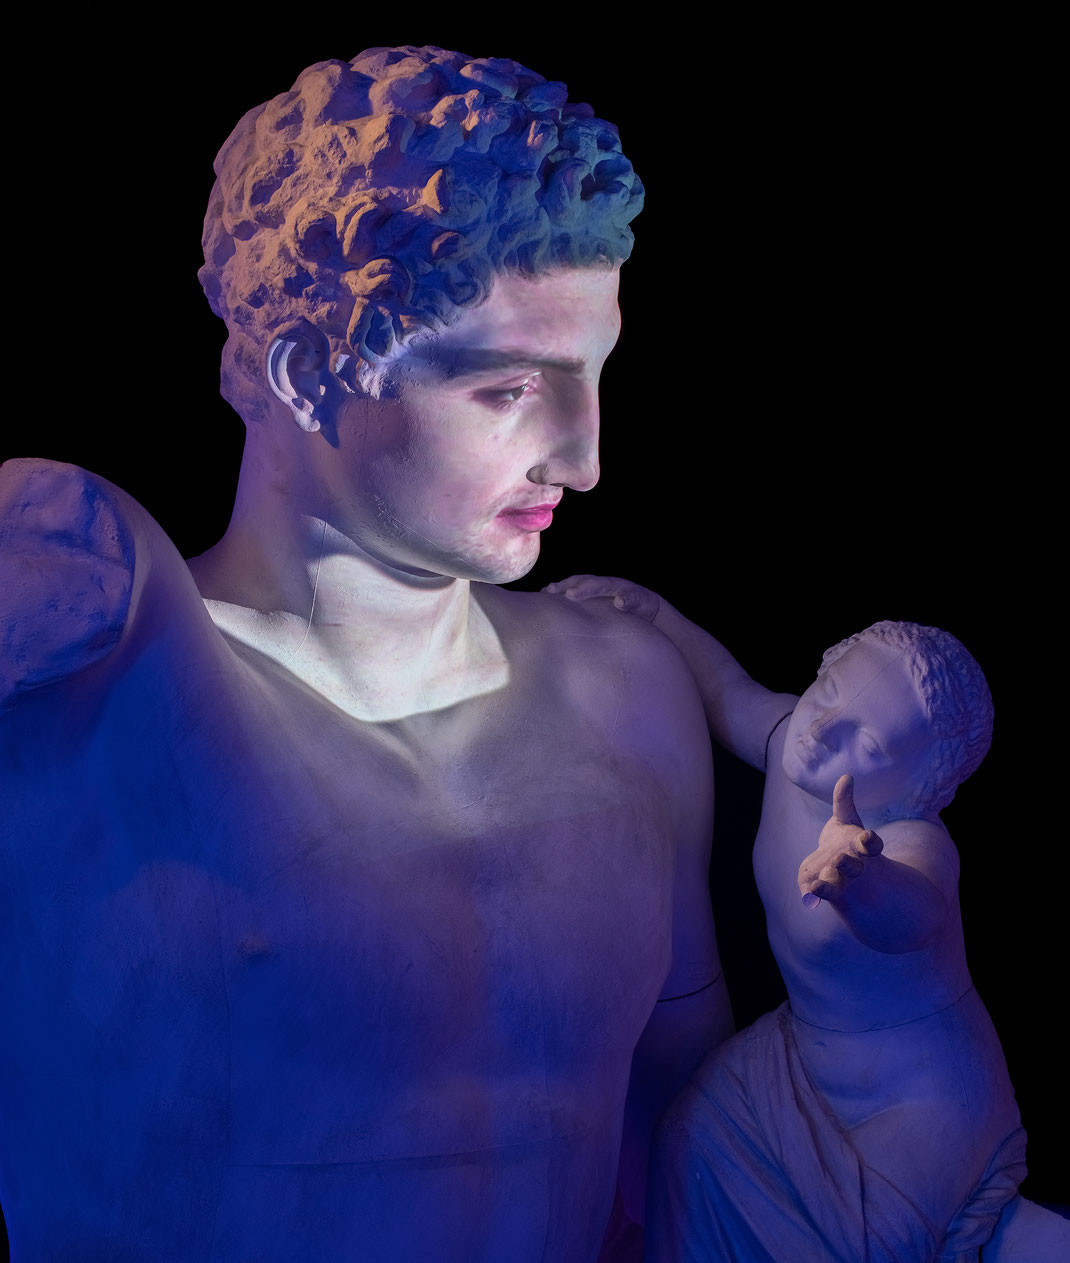 hermes-of-olympia-the-sculpture-can-talk-interactive-video-art-digital-speech-recognition-hermes-the-messenger-of-the-greek-gods